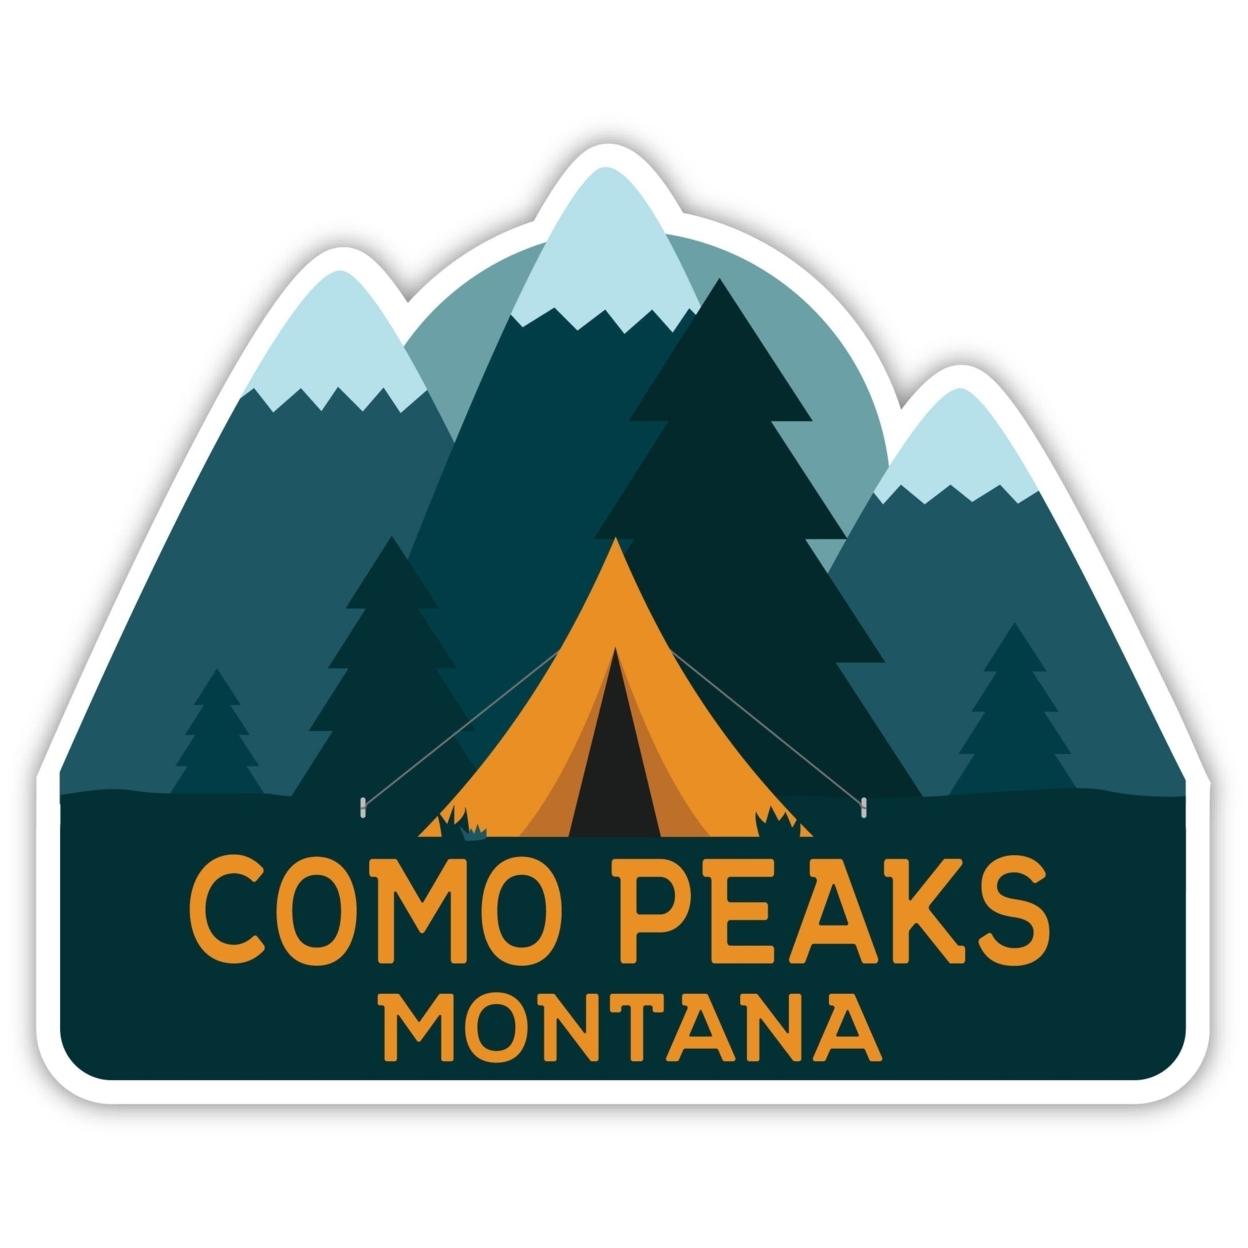 Como Peaks Montana Souvenir Decorative Stickers (Choose Theme And Size) - 4-Pack, 4-Inch, Tent